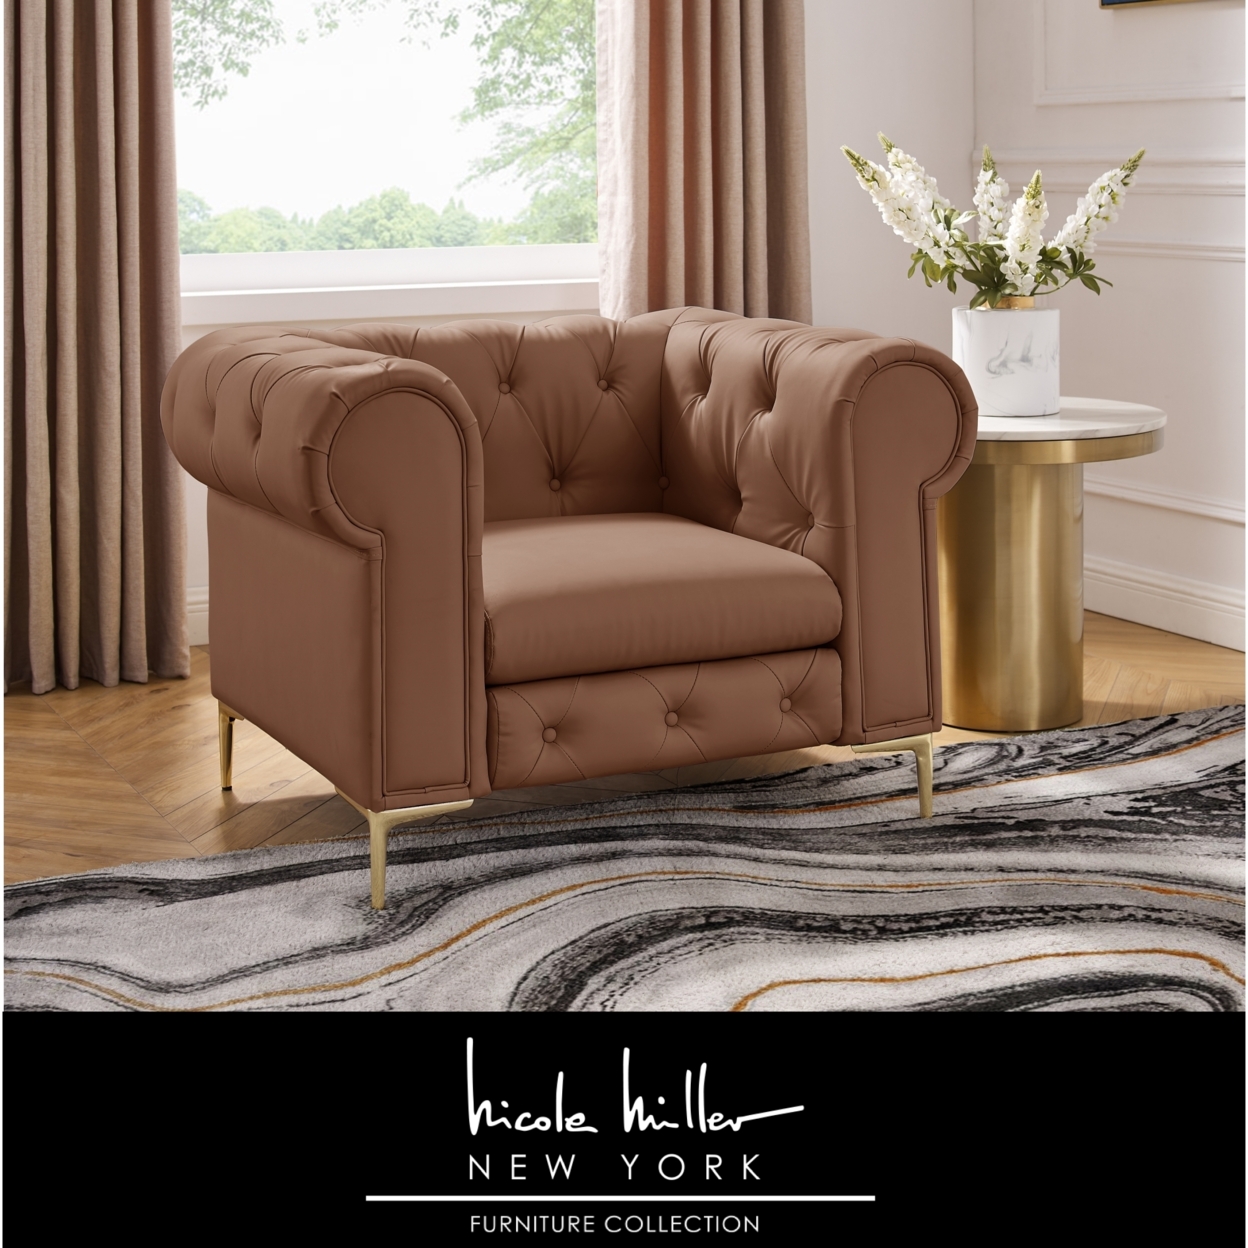 Laci Club Chair - Button Tufted - Rolled Arms - Y Leg, Sinuous Springs - Camel